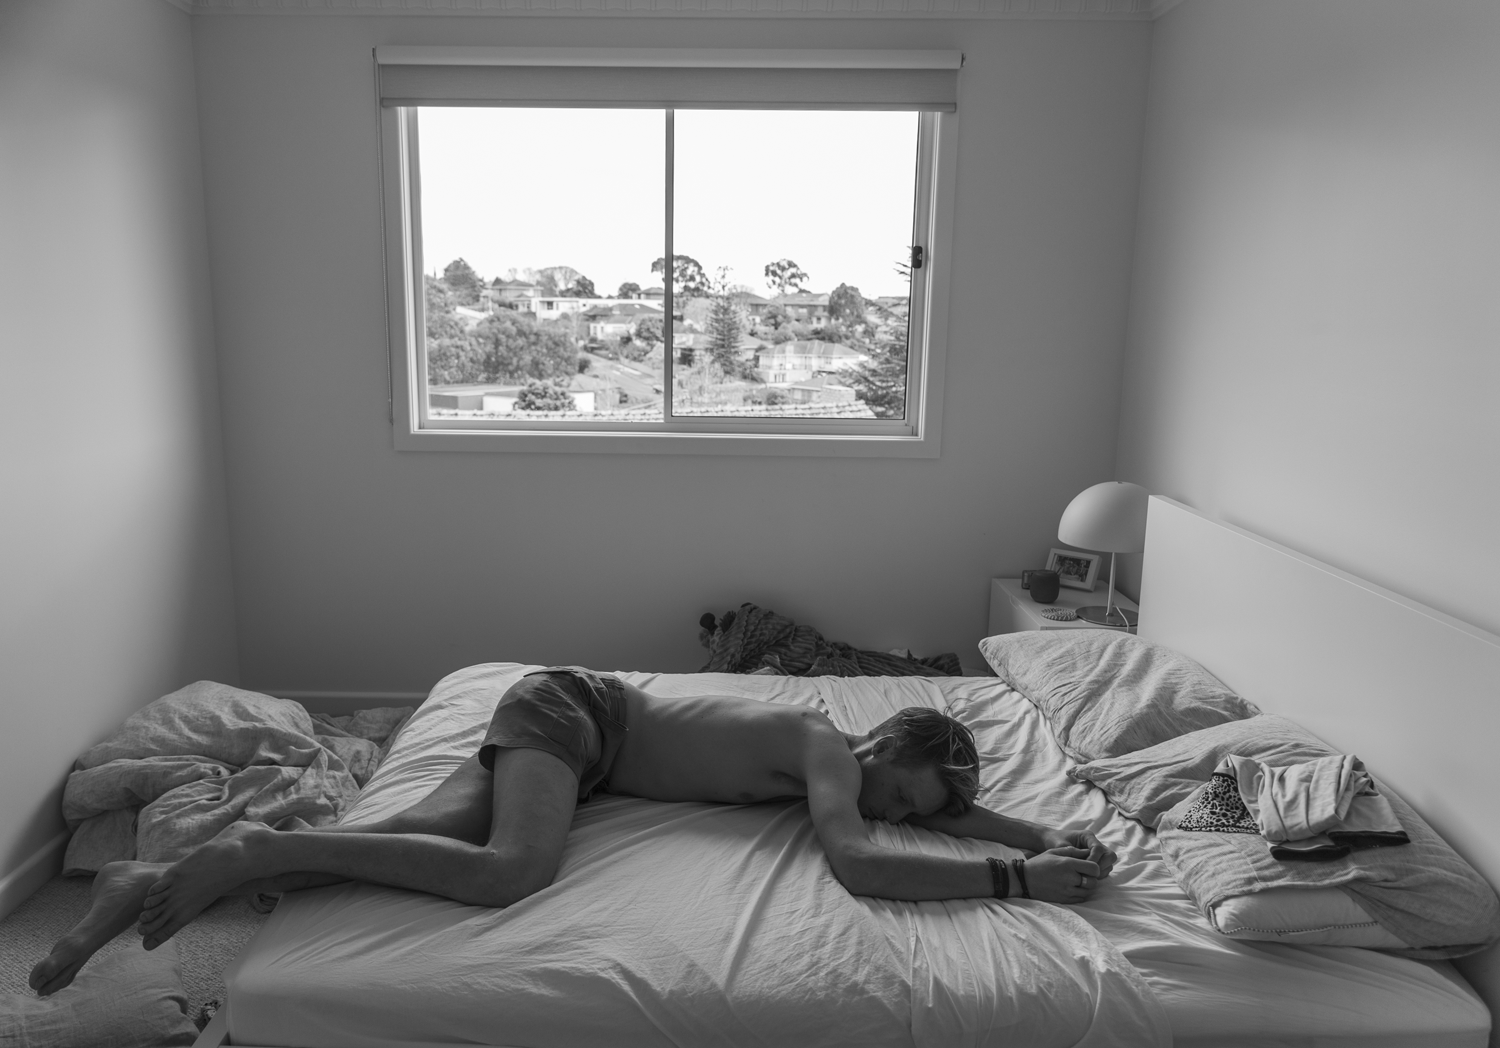 Black and white photograph of a bedroom interior with a teenage boy sleeping face down on a bed.